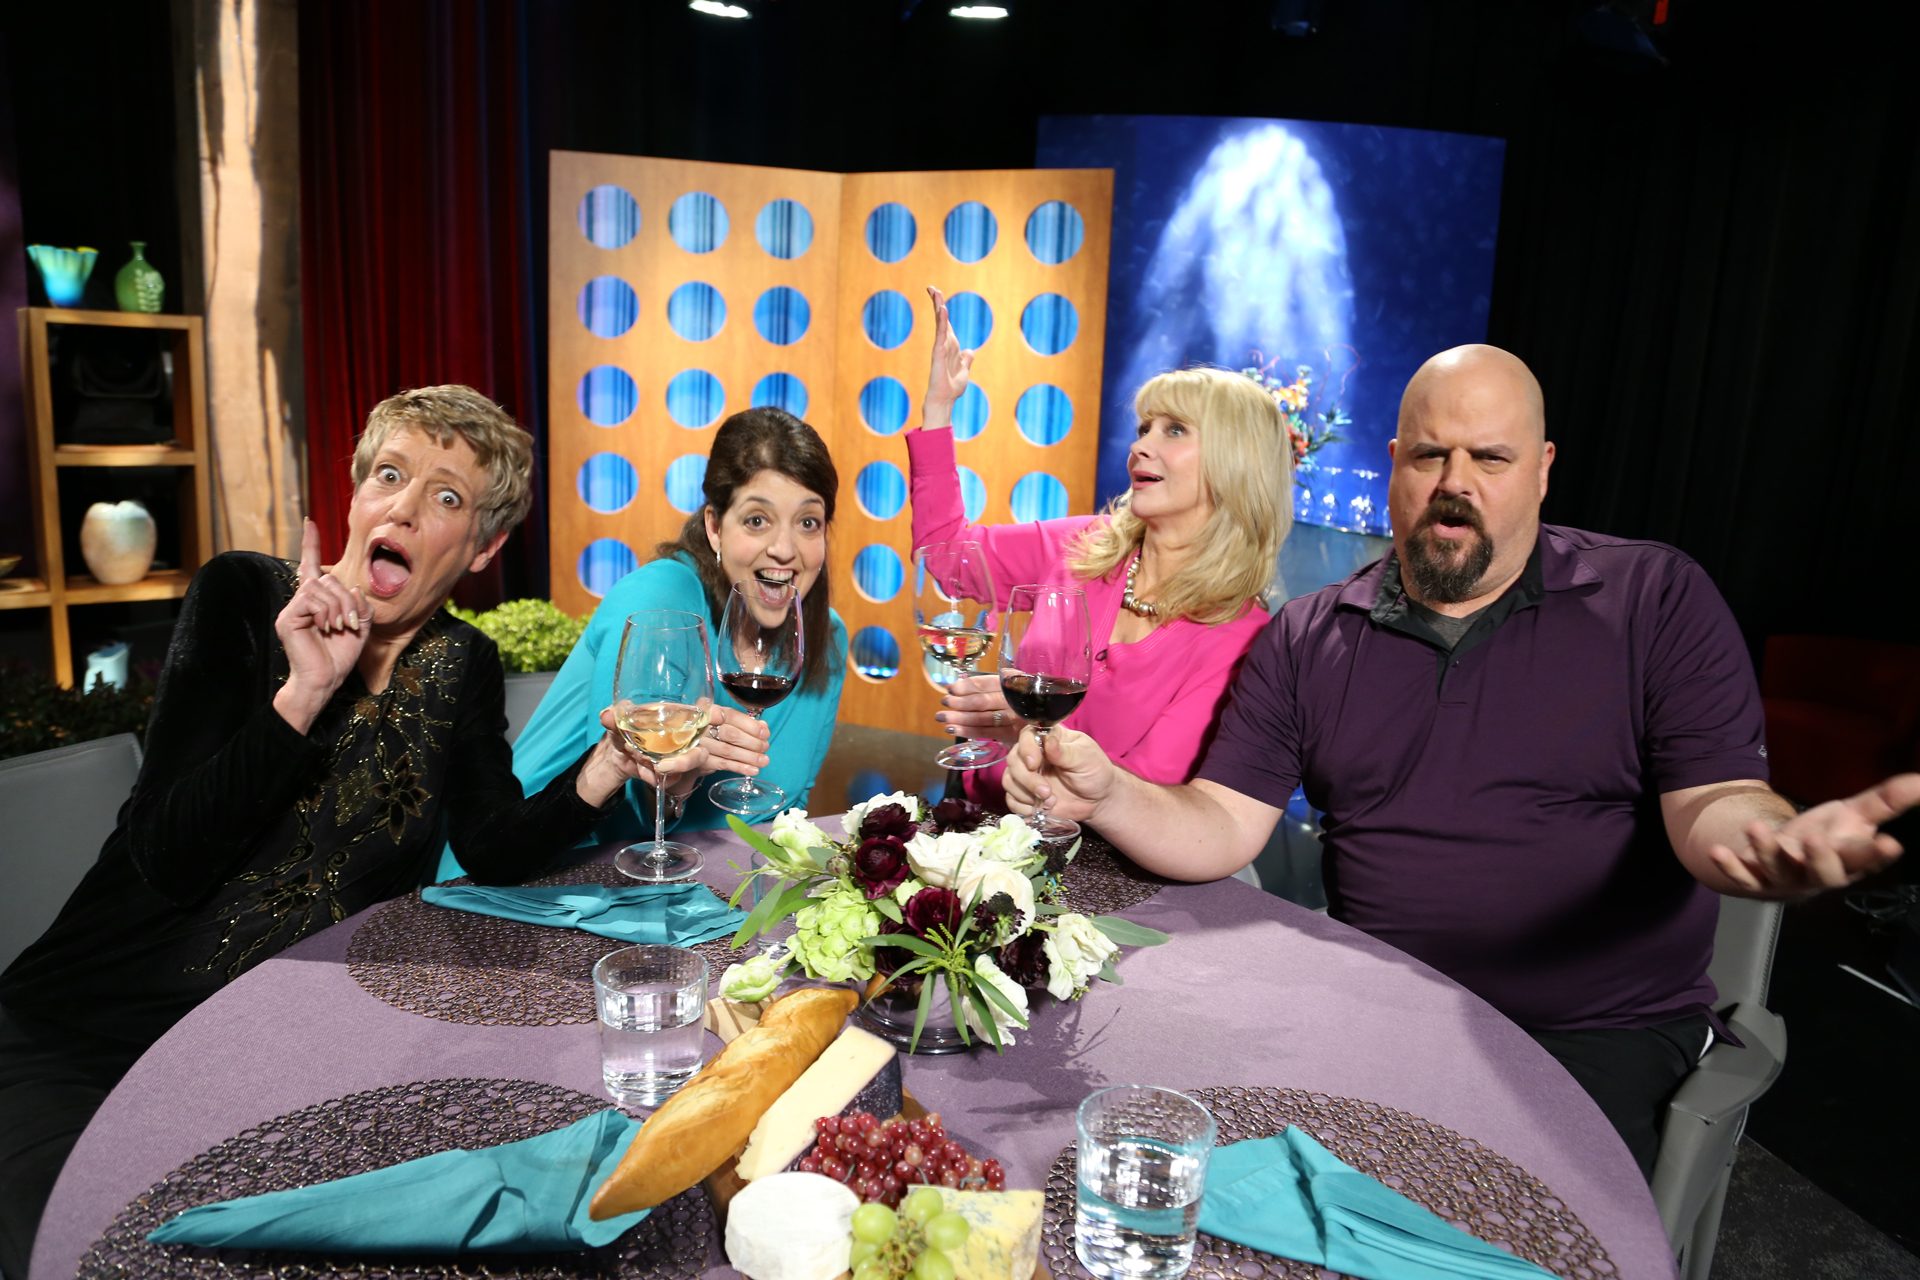 Host Leslie Sbrocco and guests having fun on the set of the premiere episode of season 12.